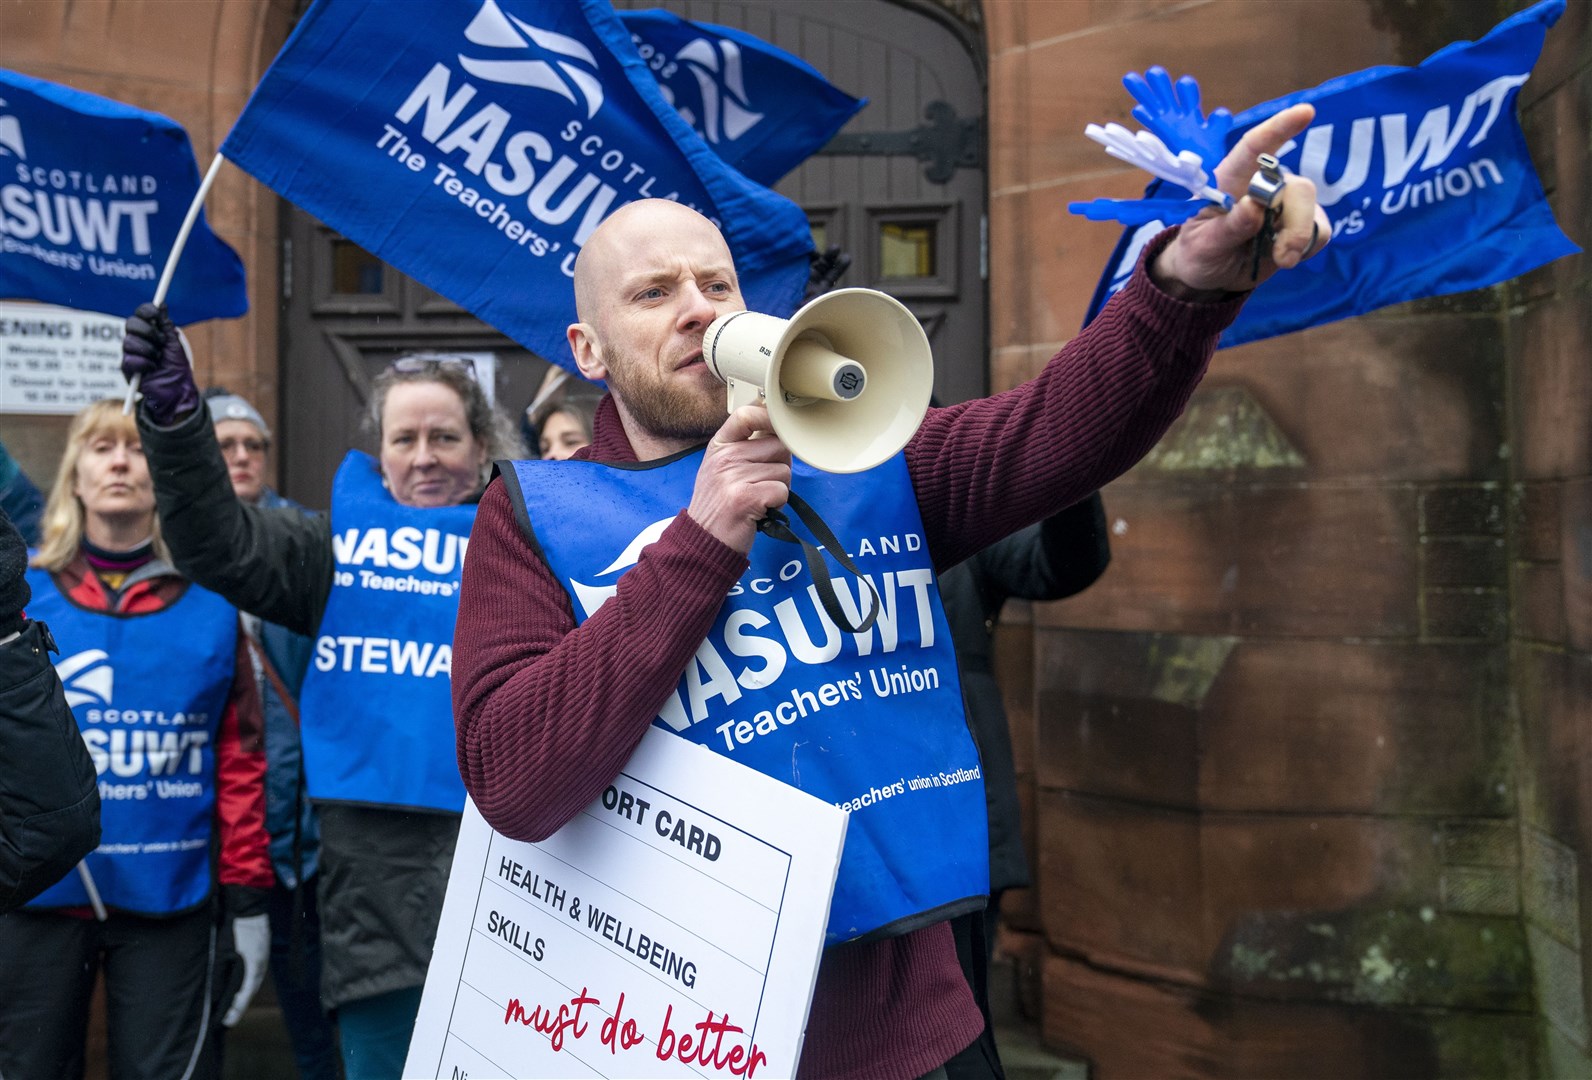 Members of NASUWT the teachers’ union, deliver a ‘report card’ outside the constituency office of First Minister Nicola Sturgeon in Glasgow as teachers walk out amid a pay dispute (Jane Barlow/PA)